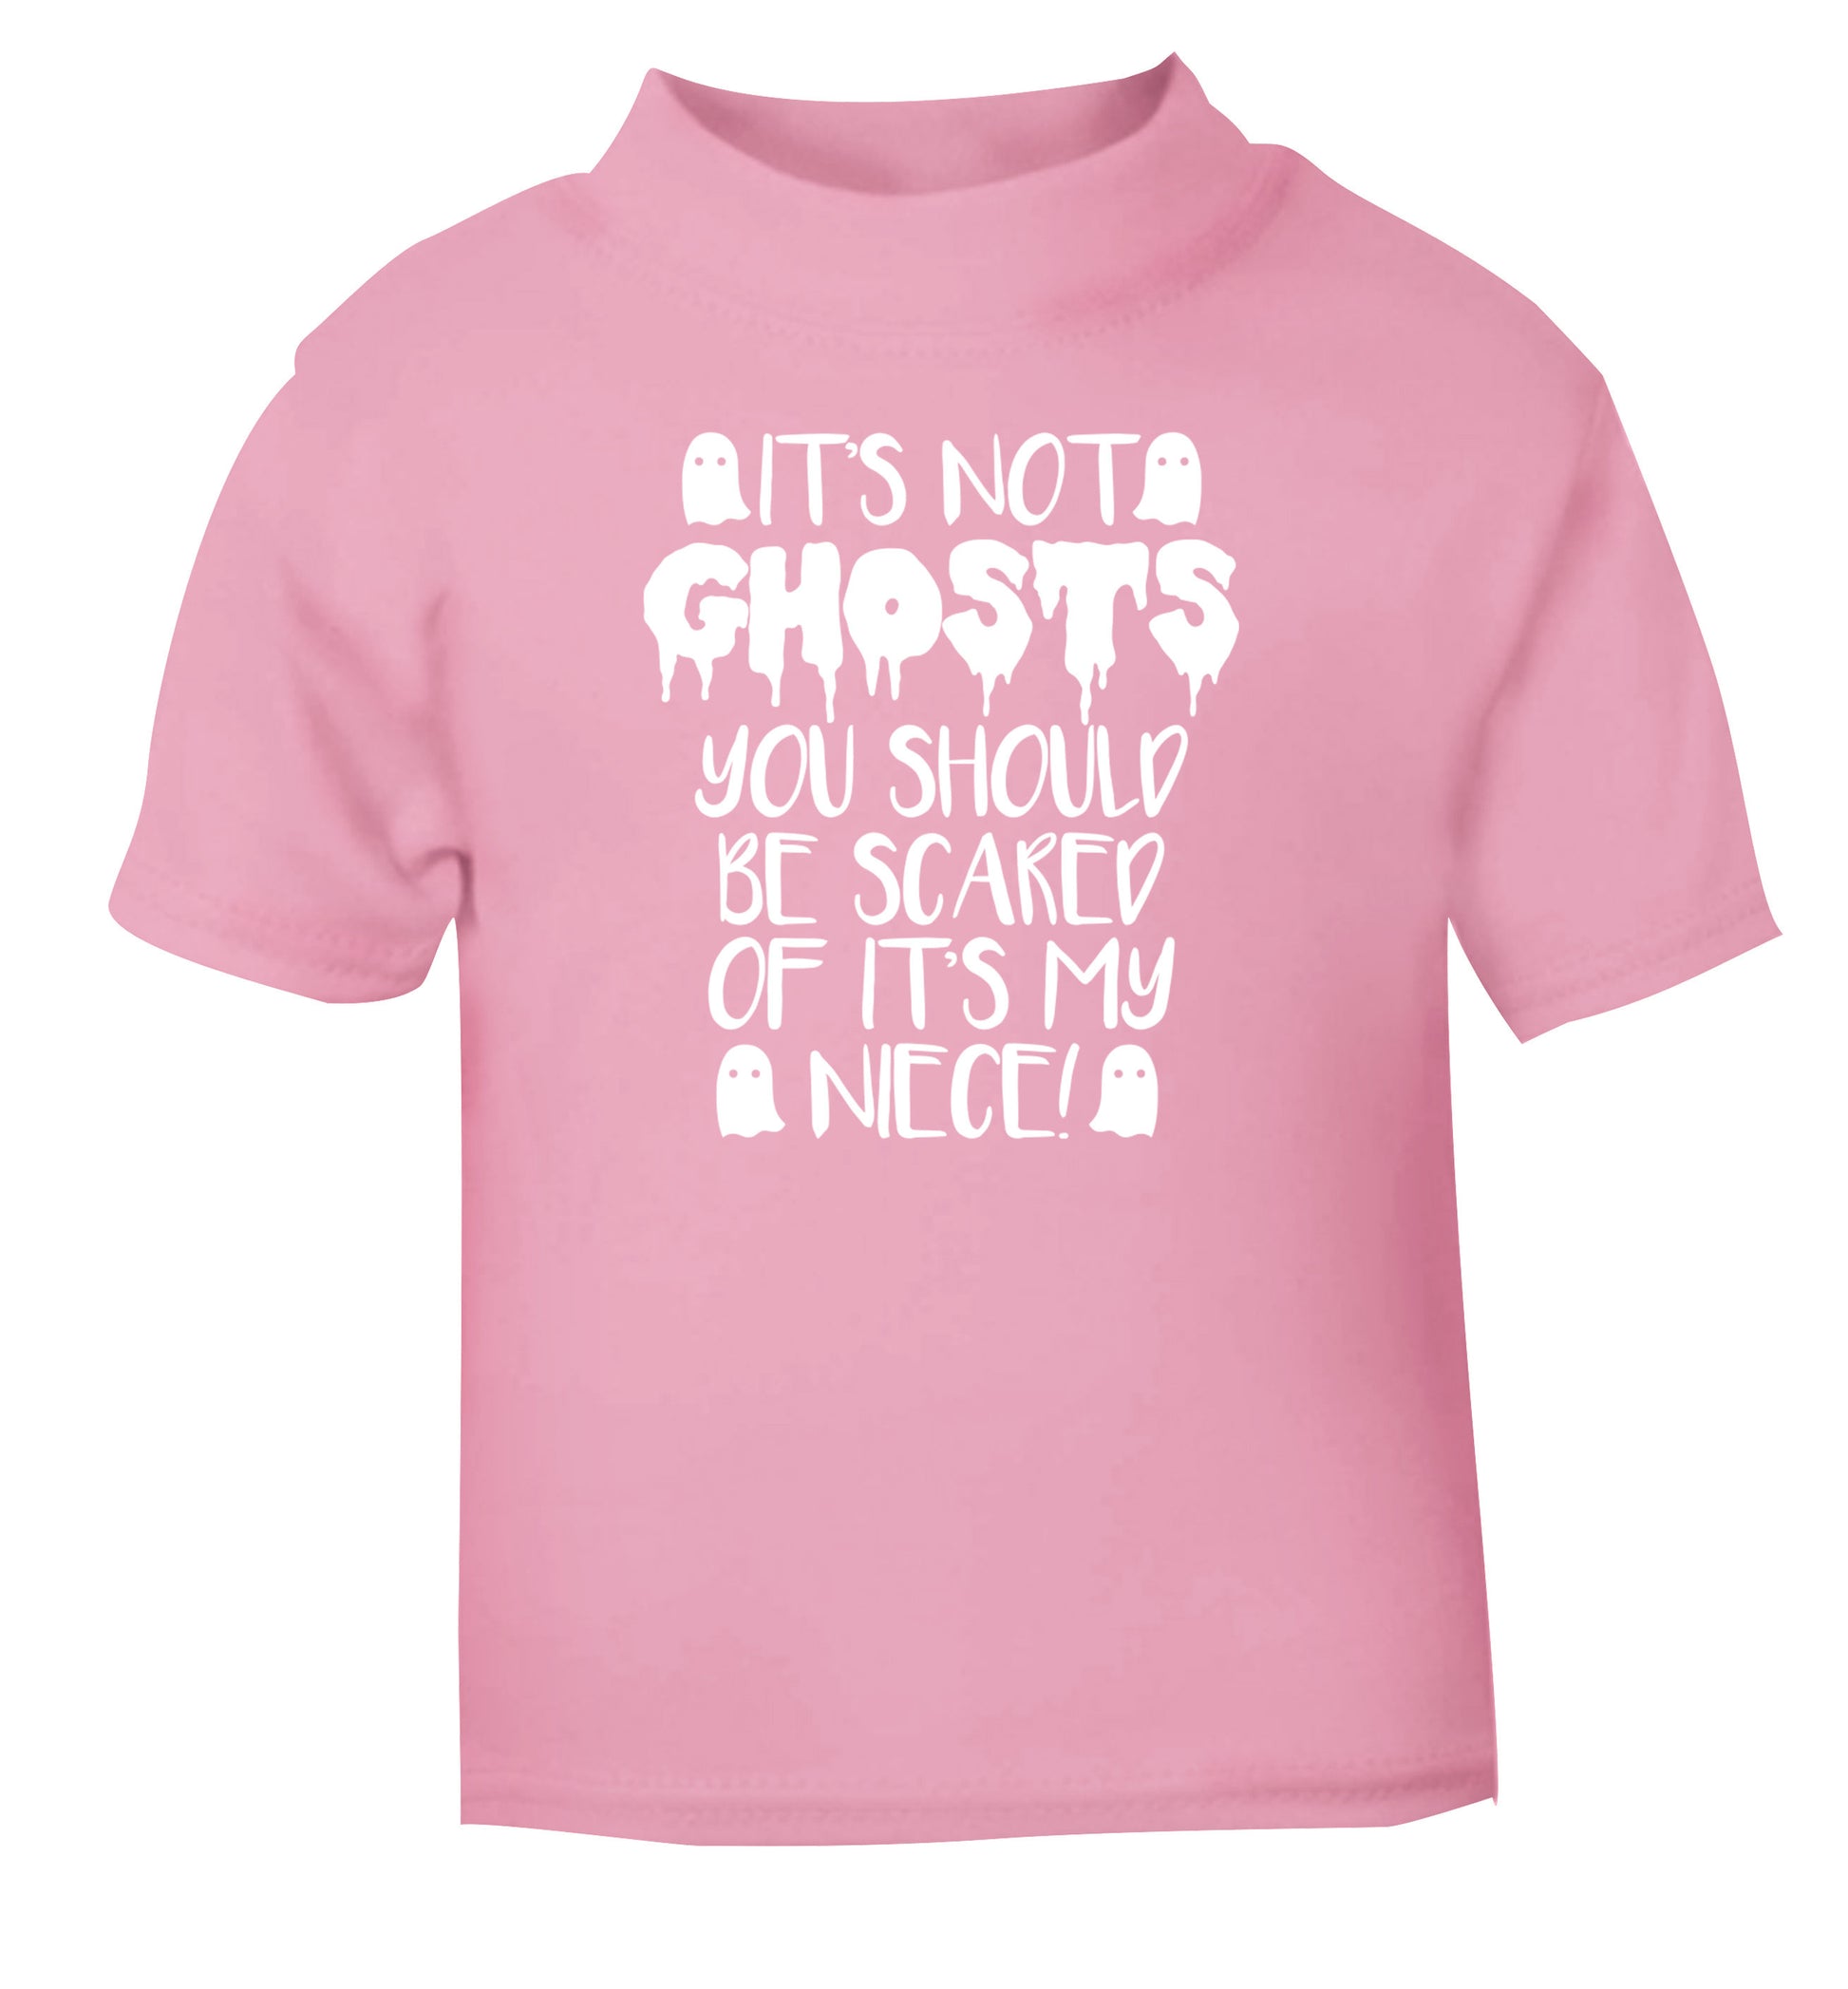 It's not ghosts you should be scared of it's my niece! light pink Baby Toddler Tshirt 2 Years